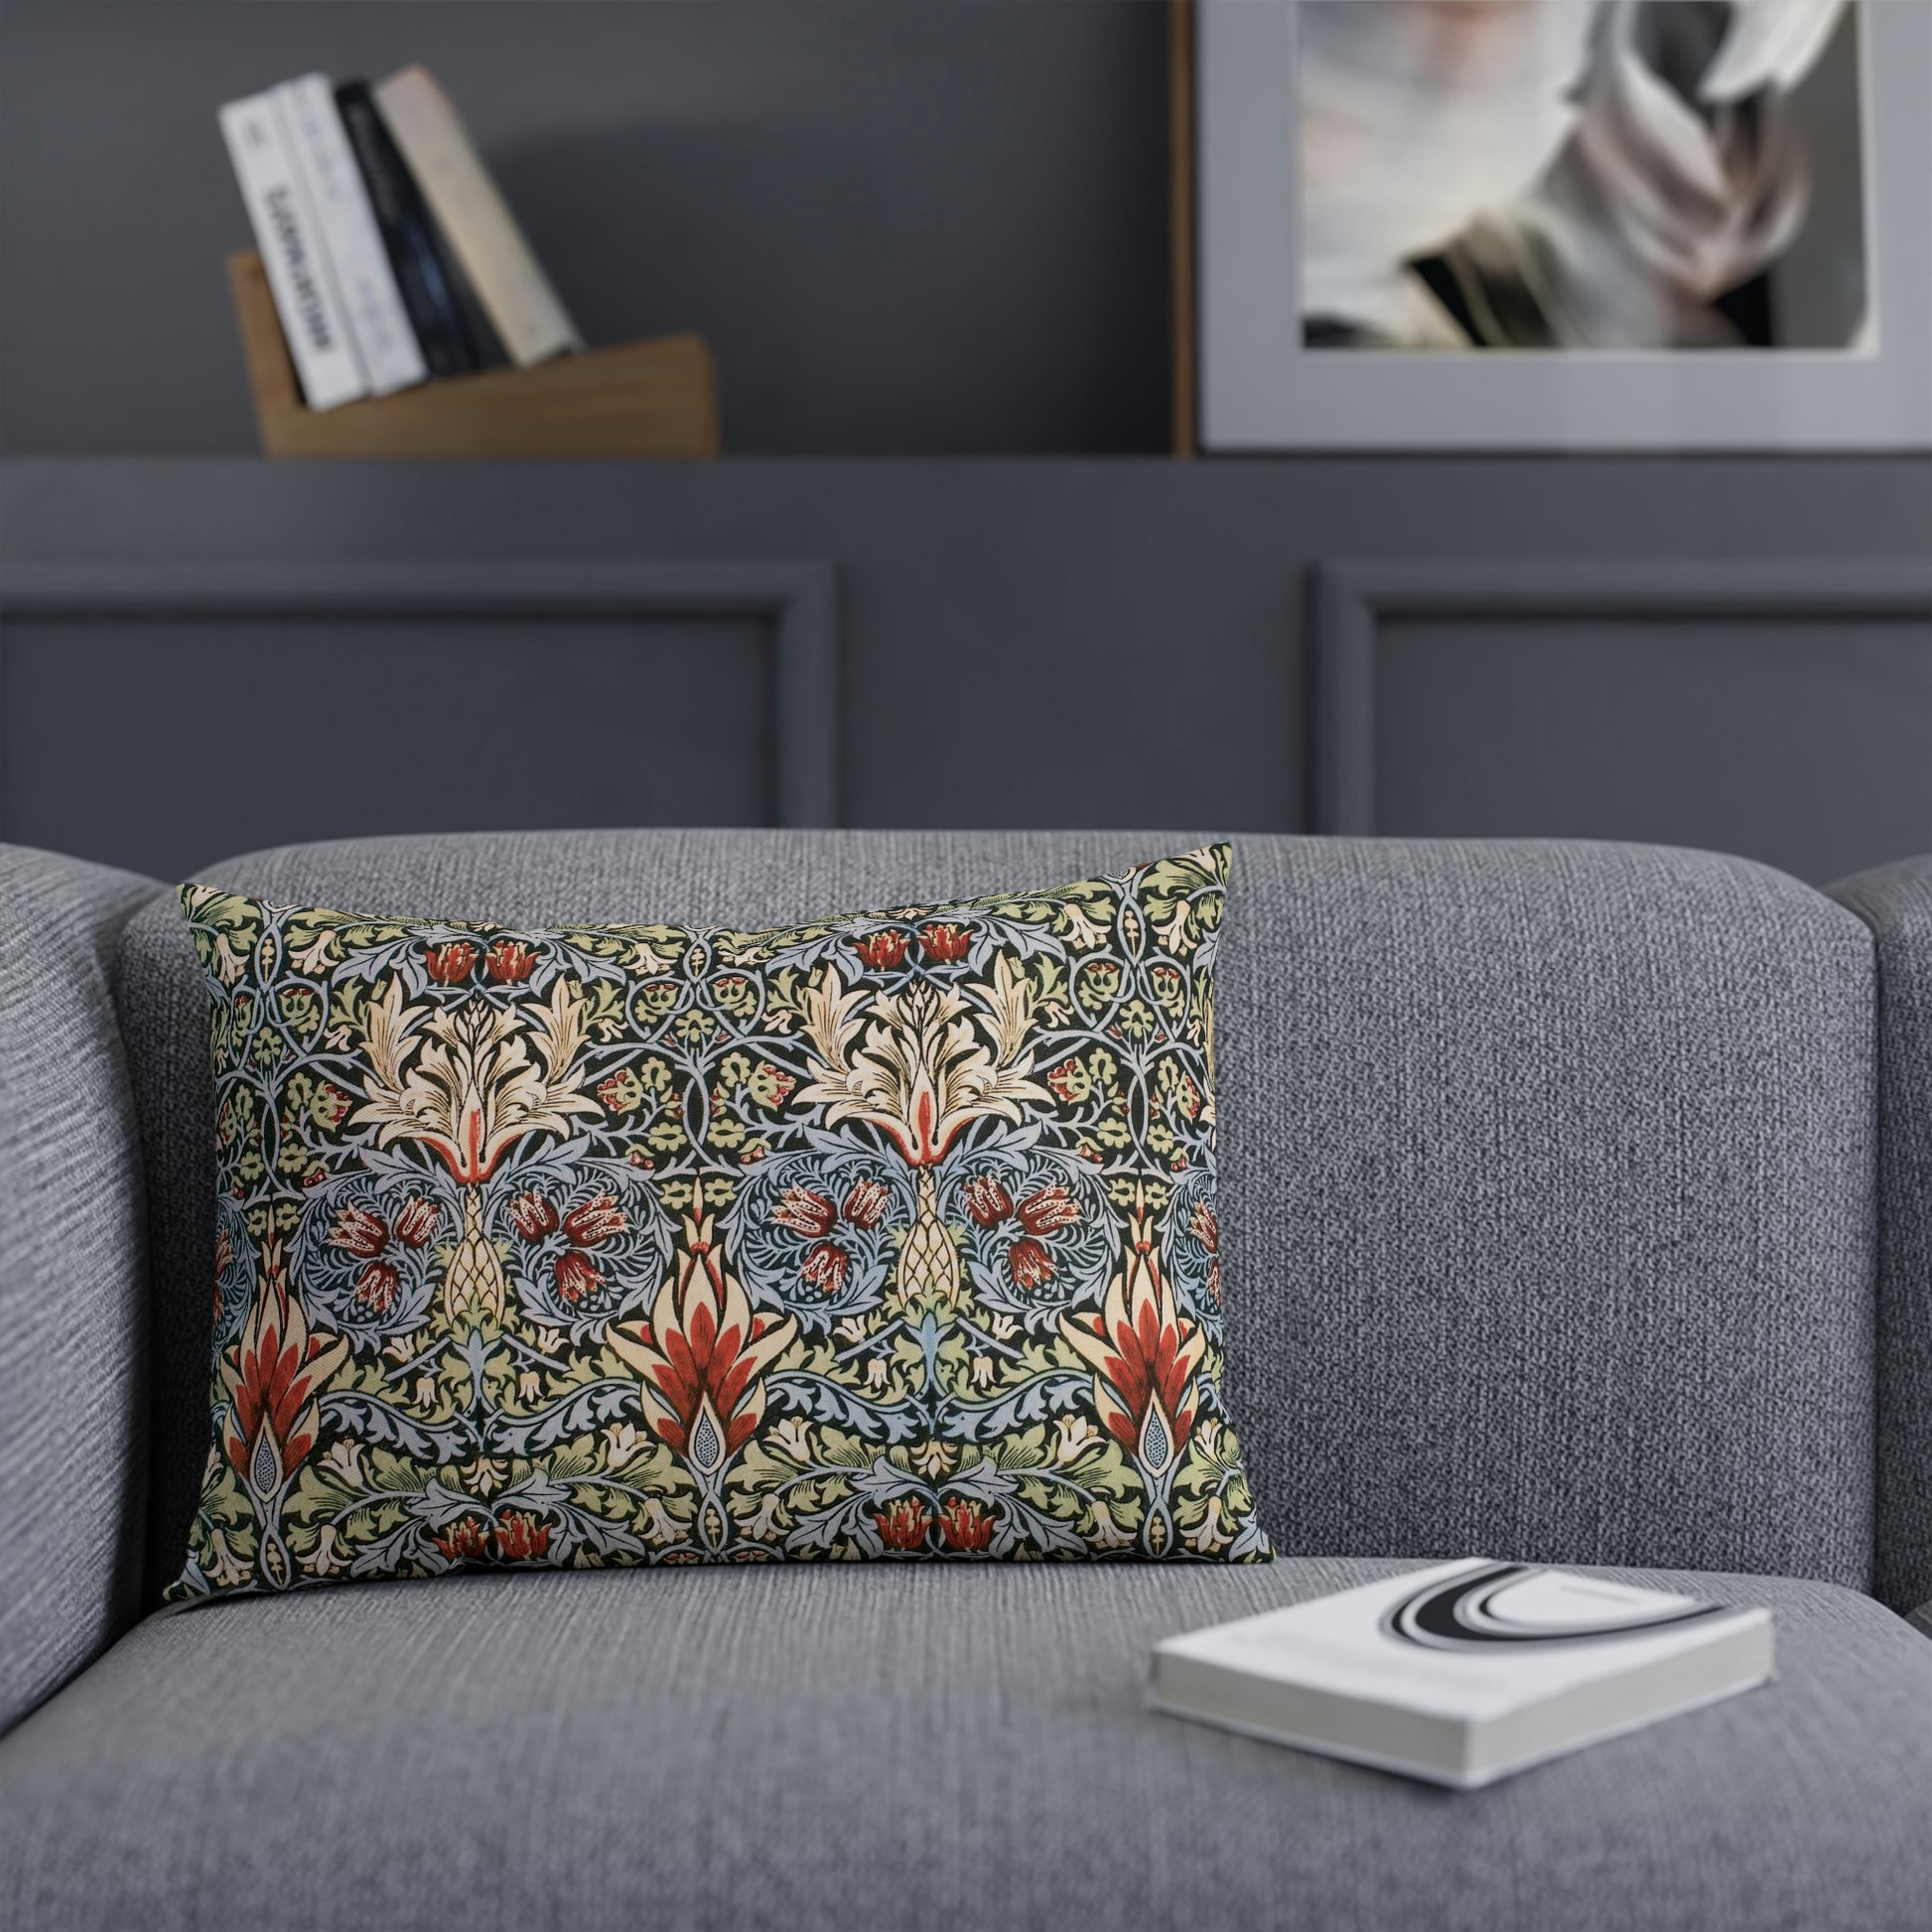 William-Morris-and-Co-Cushion-and-Cushion-Cover-Snakeshead-Collection-13